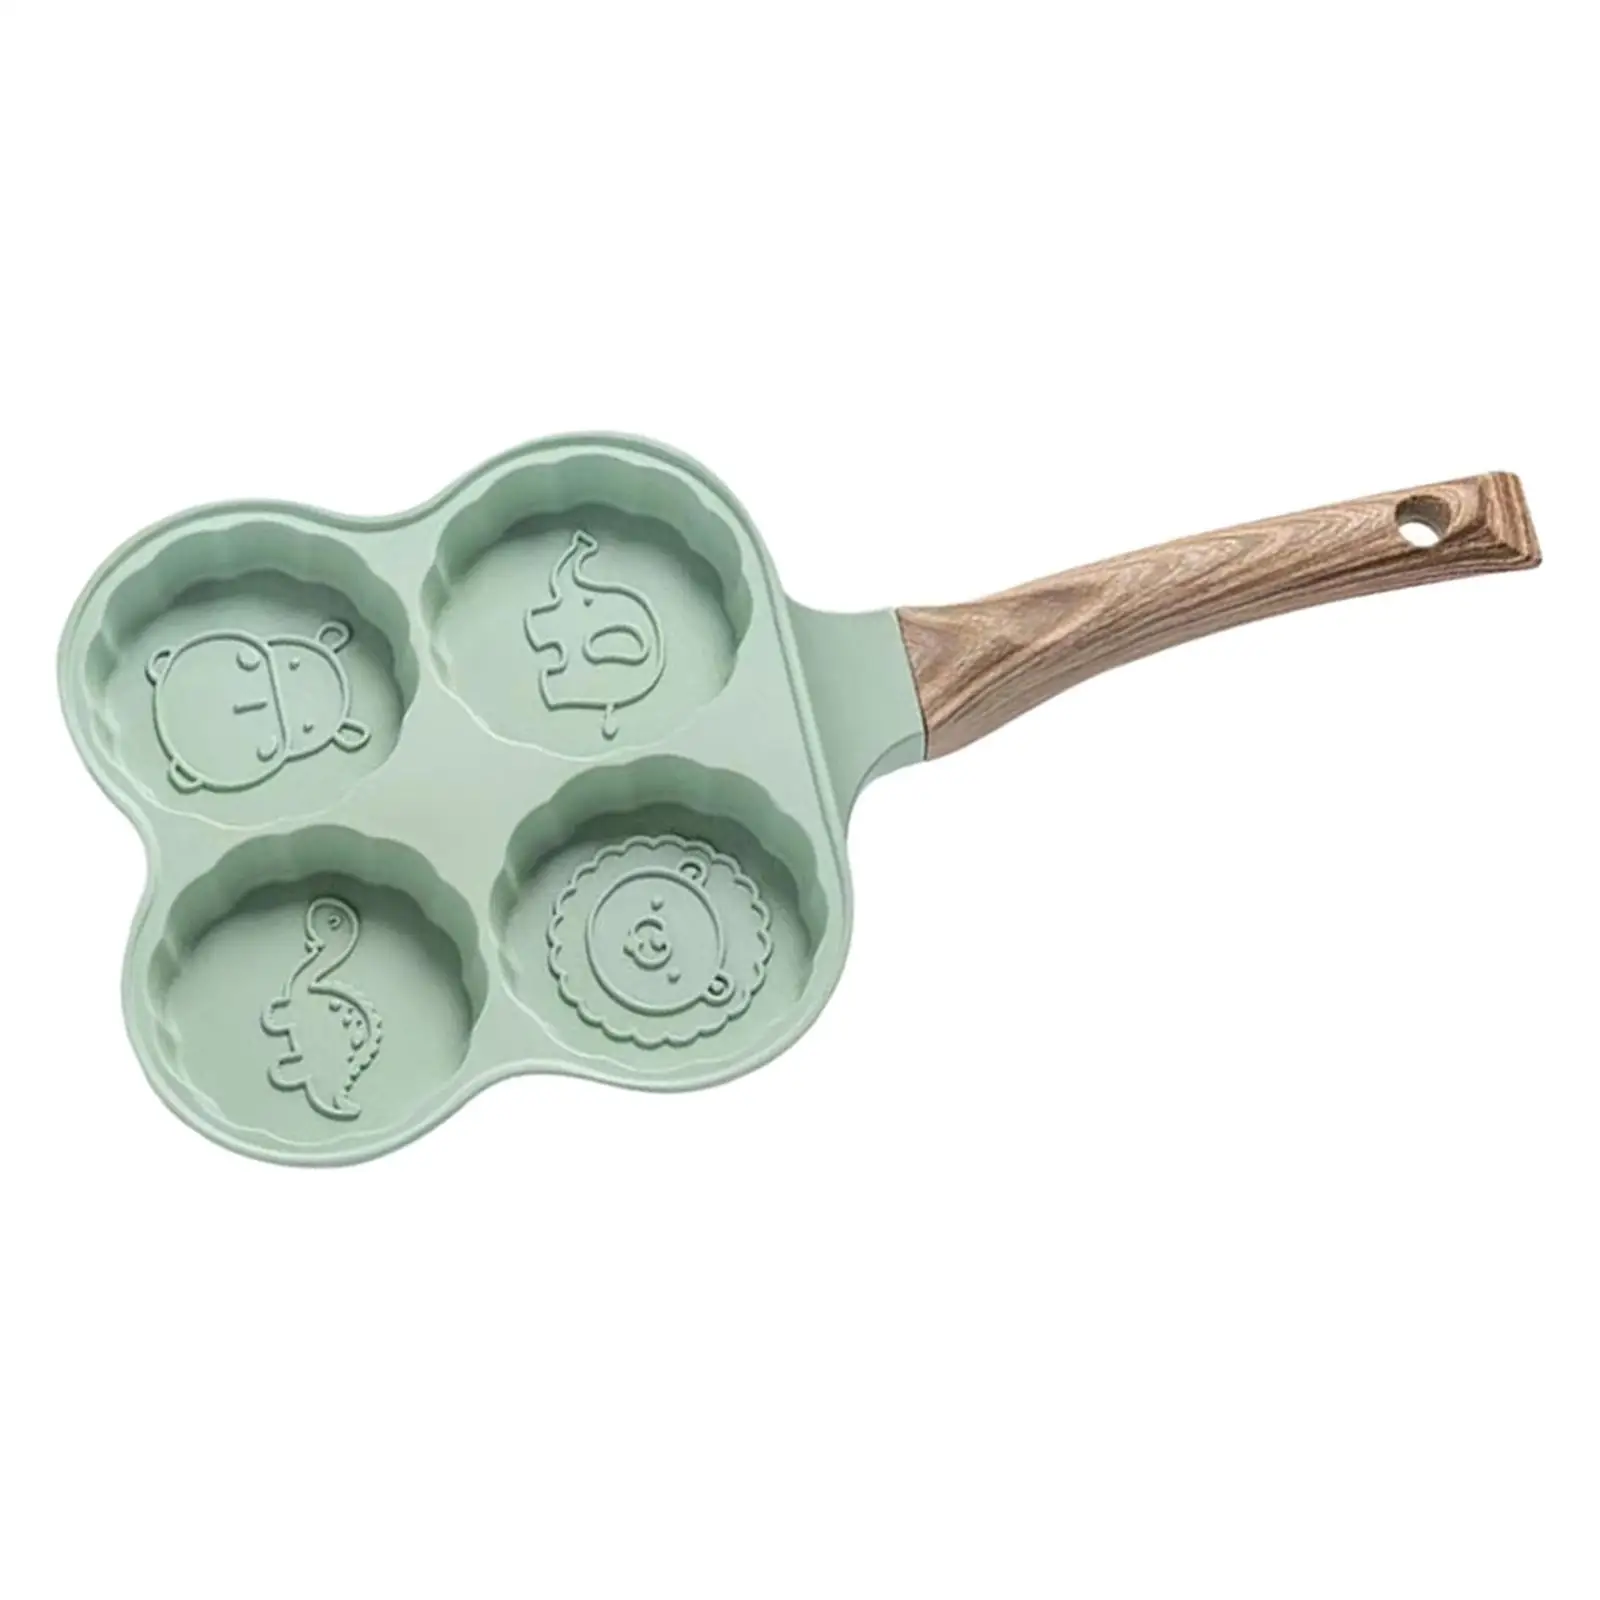 Egg Frying Pan Cookware Wooden Handle Egg Ham Pans for Breakfast Cooking Gas